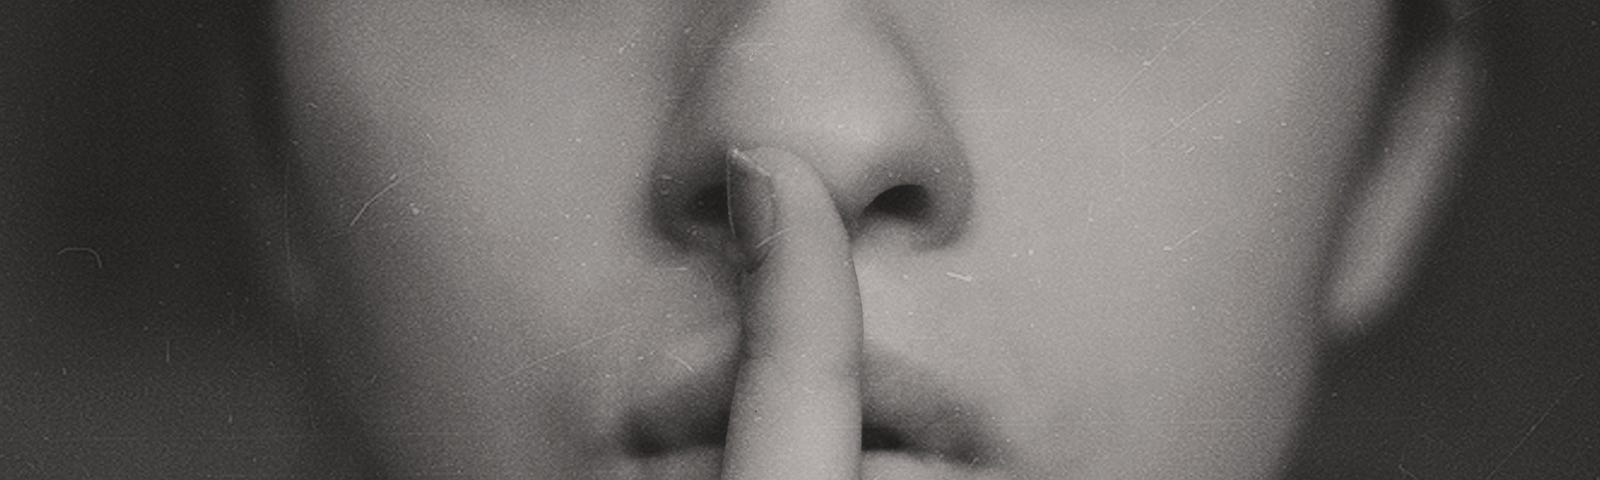 Woman presses her index finger to her lips requesting to be quiet